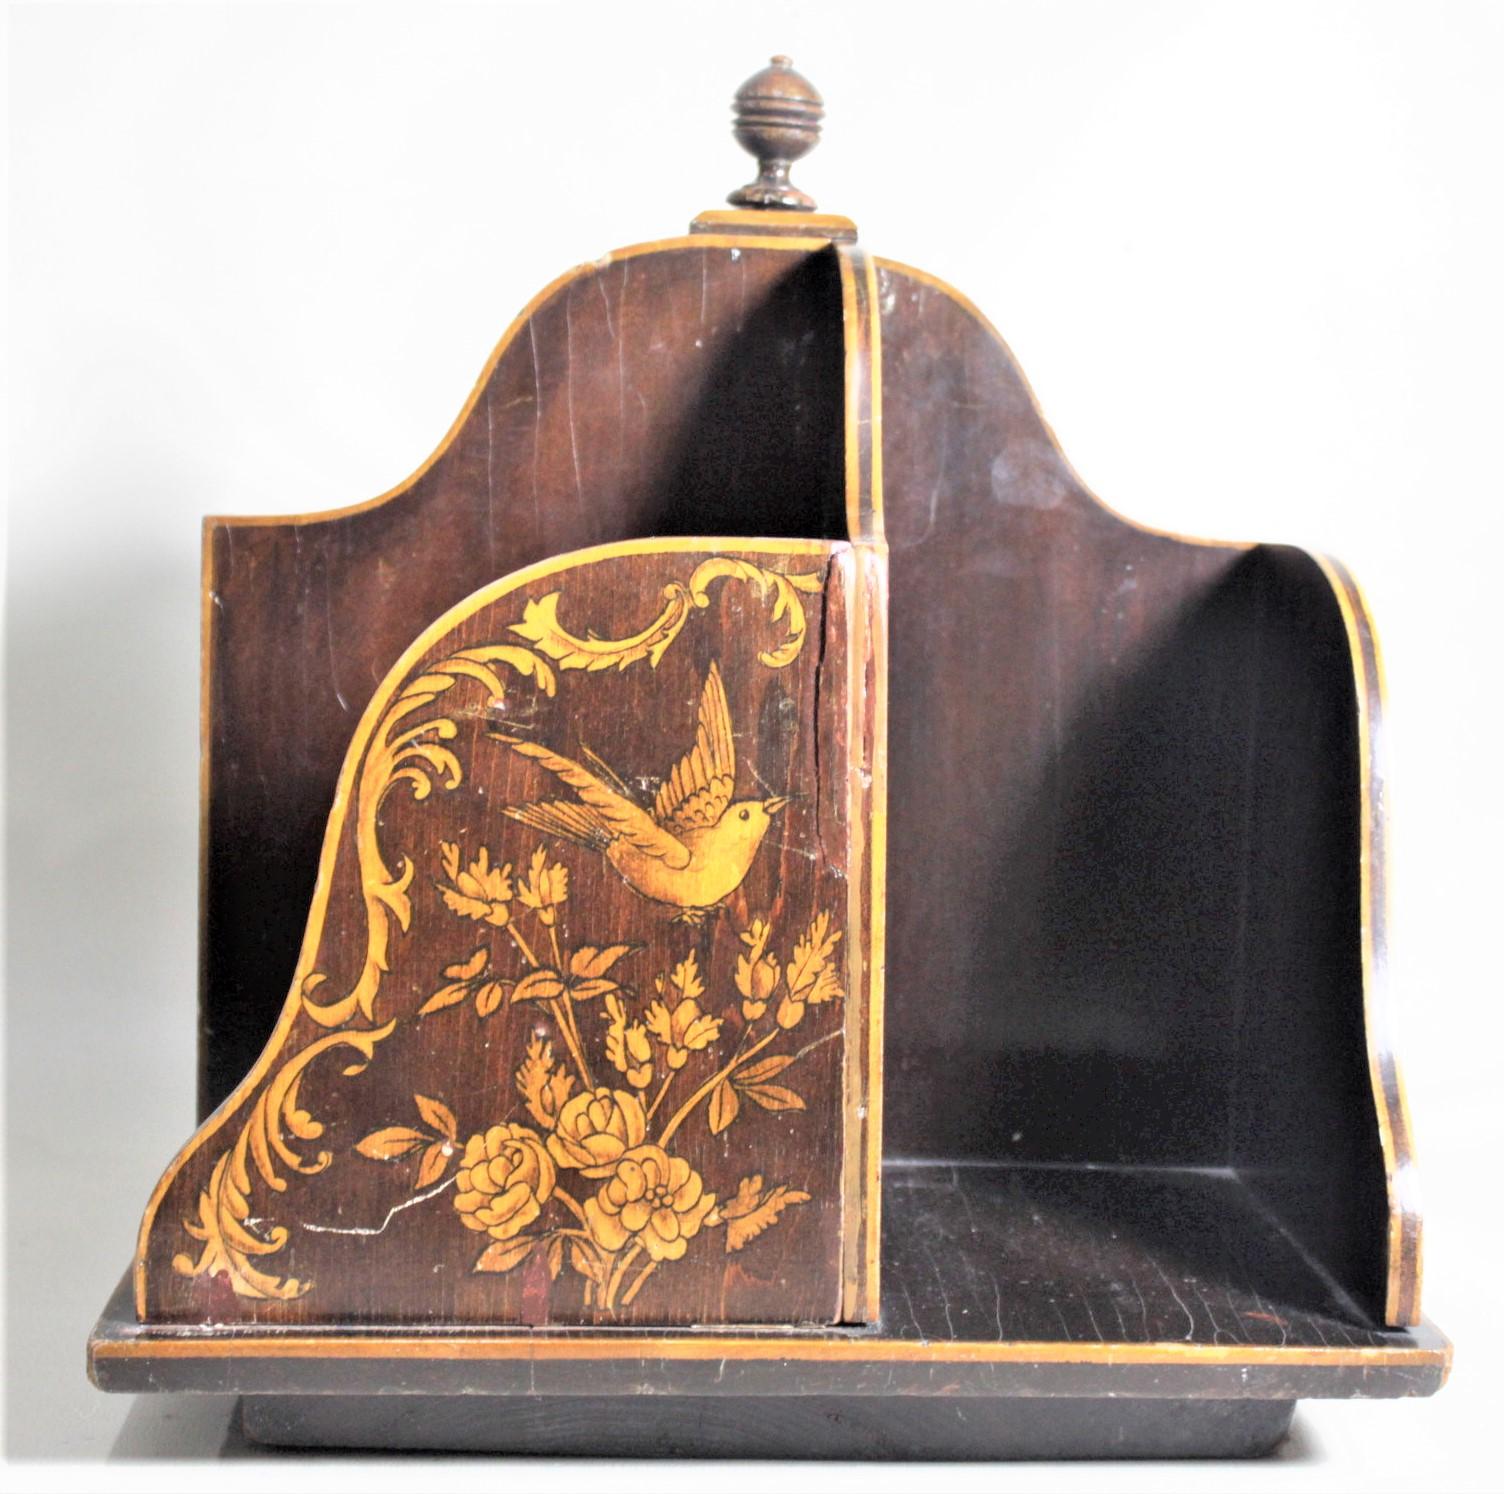 Cold-Painted Antique Wooden Book Mill or Rotating Desk Bookcase with Flower & Bird Decoration